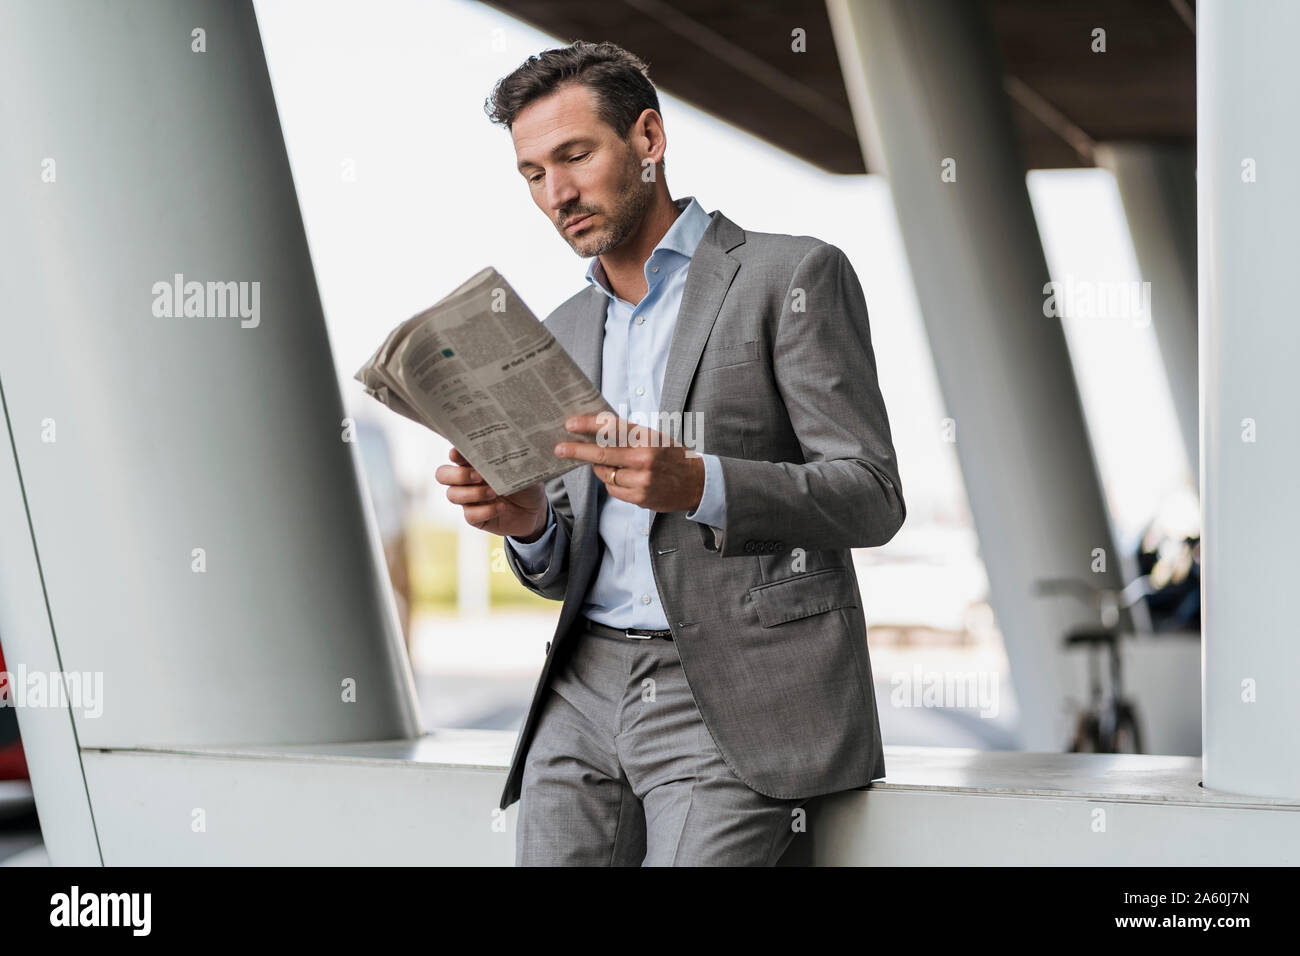 Portrait of businessman reading newspaper outdoors Stock Photo